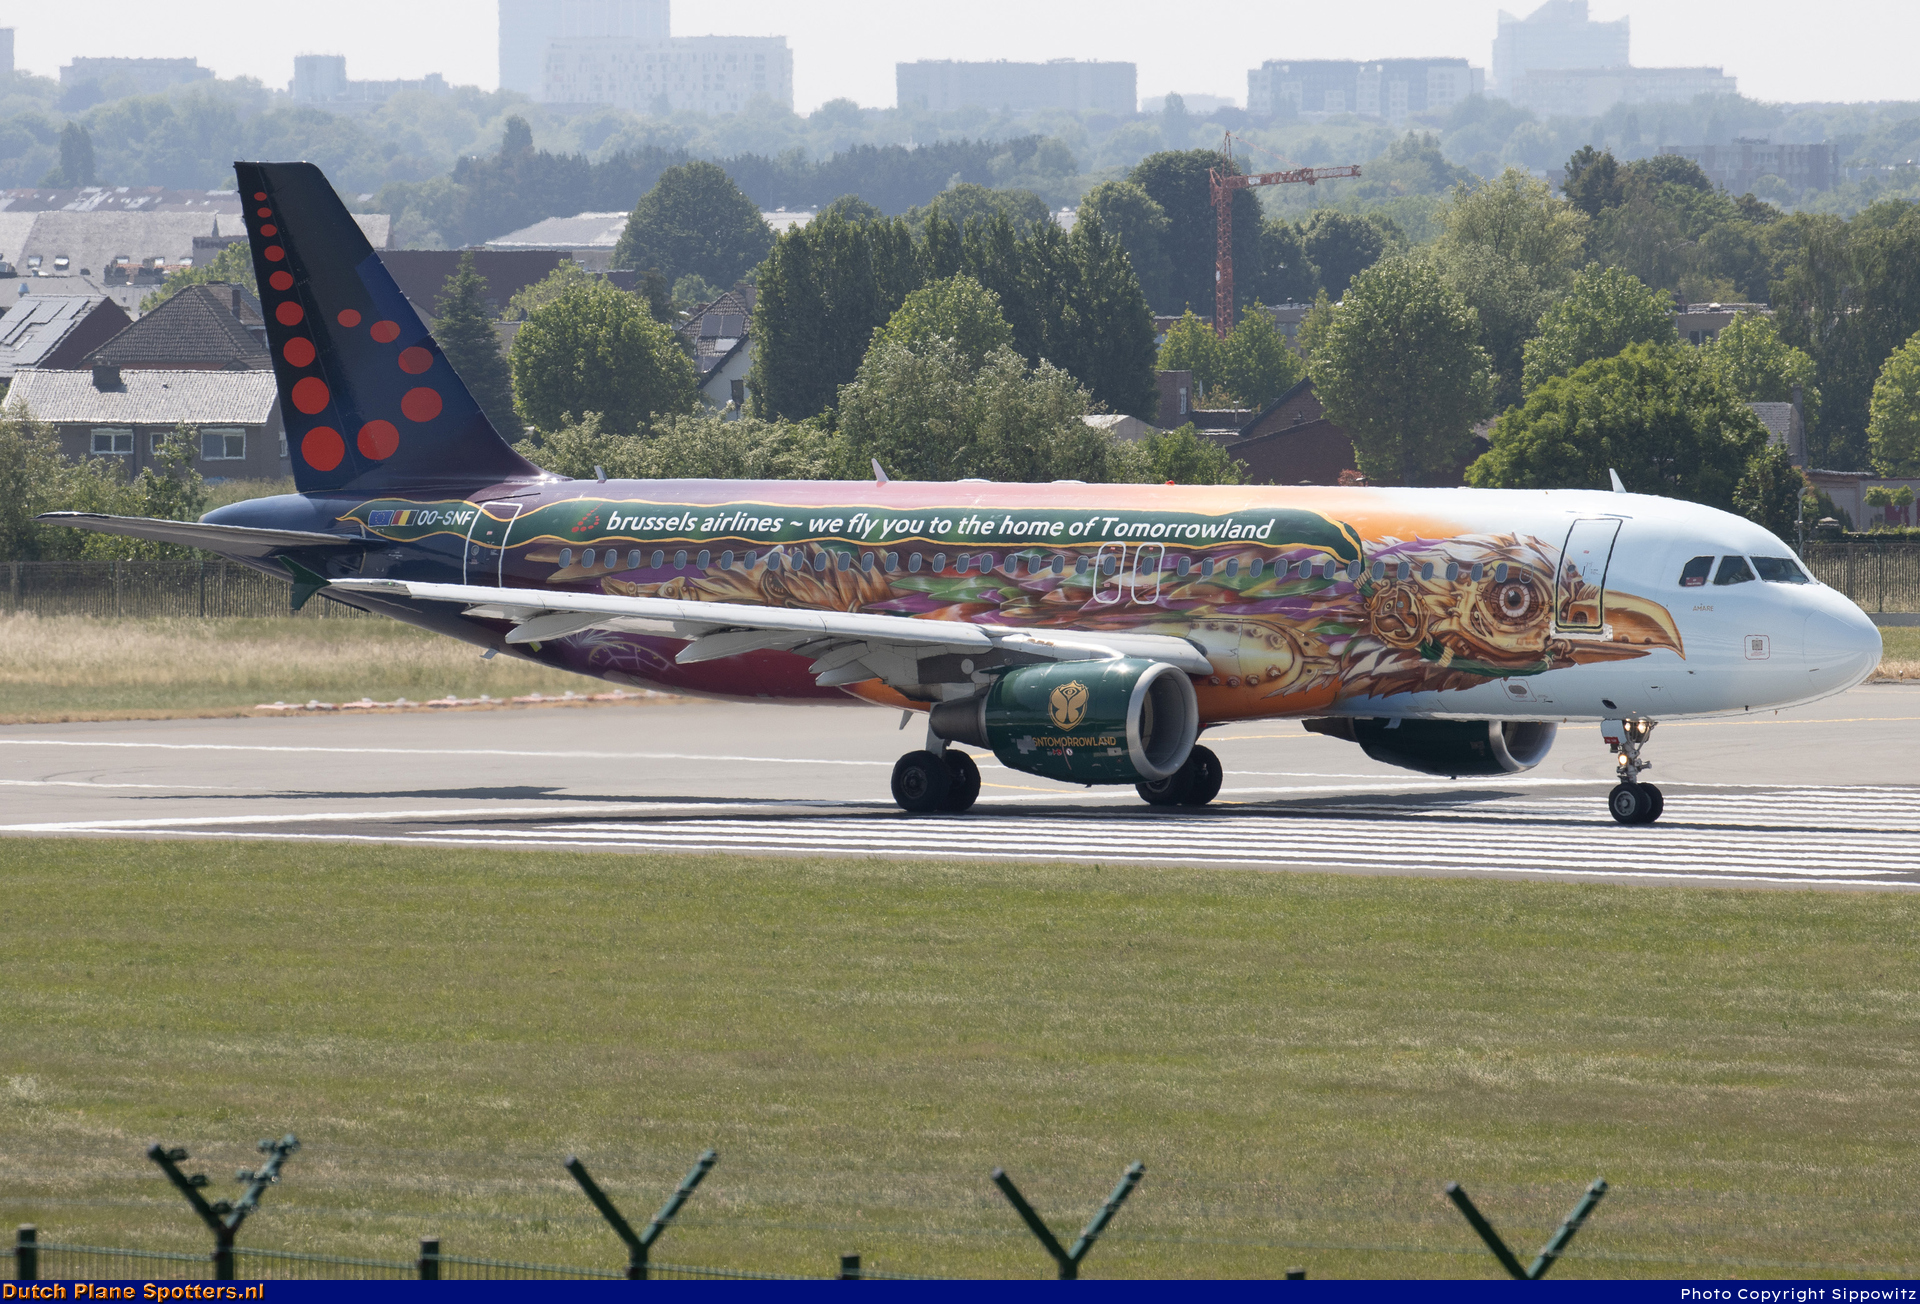 OO-SNF Airbus A320 Brussels Airlines by Sippowitz